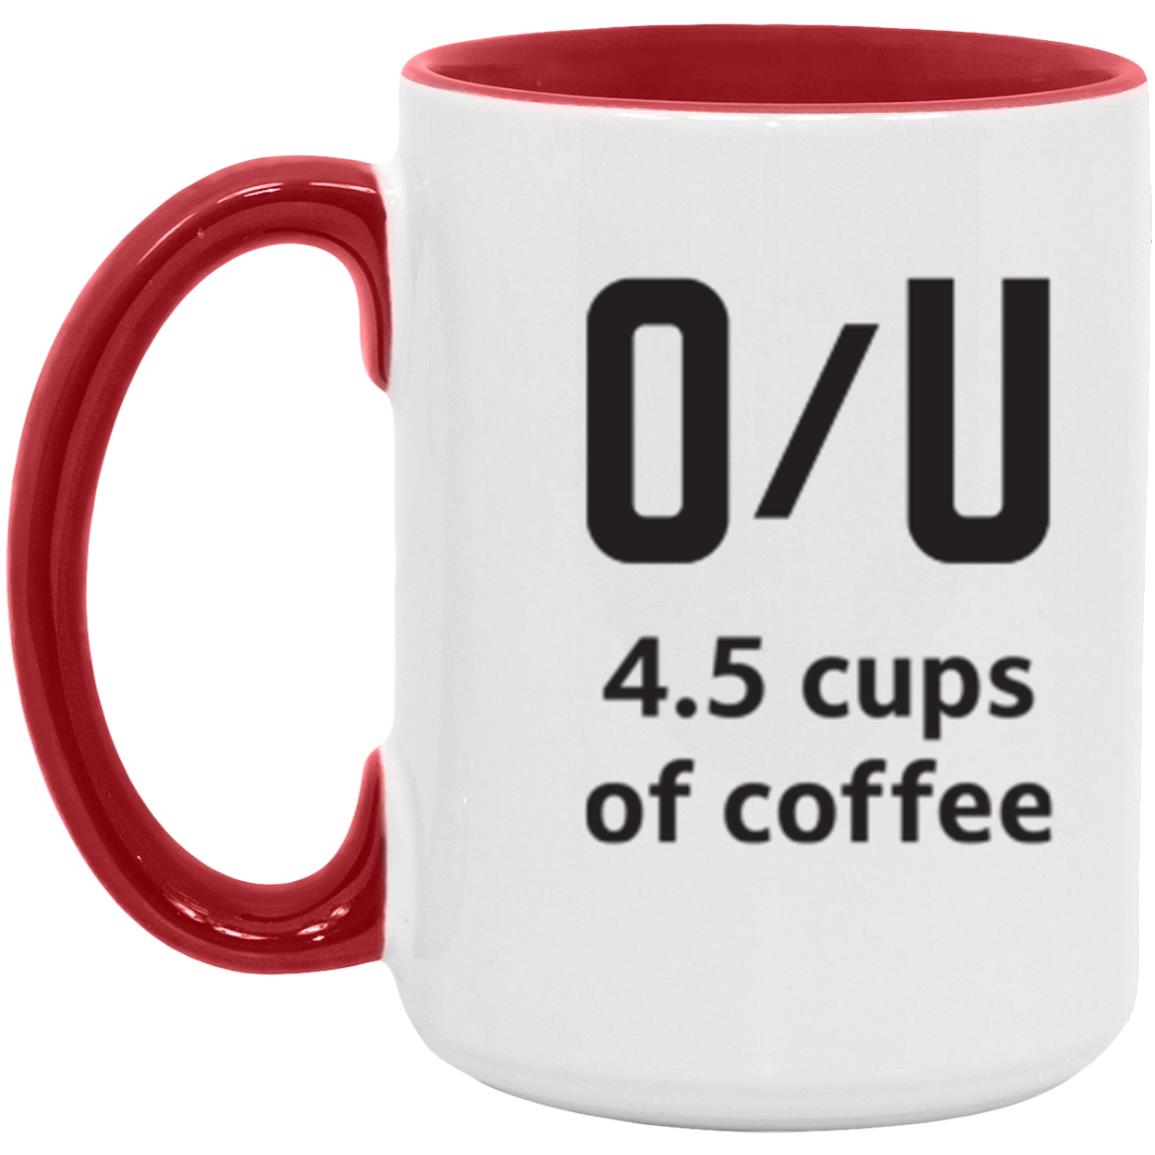 Over / Under 4.5 cups of coffee - 15oz. Accent Mug